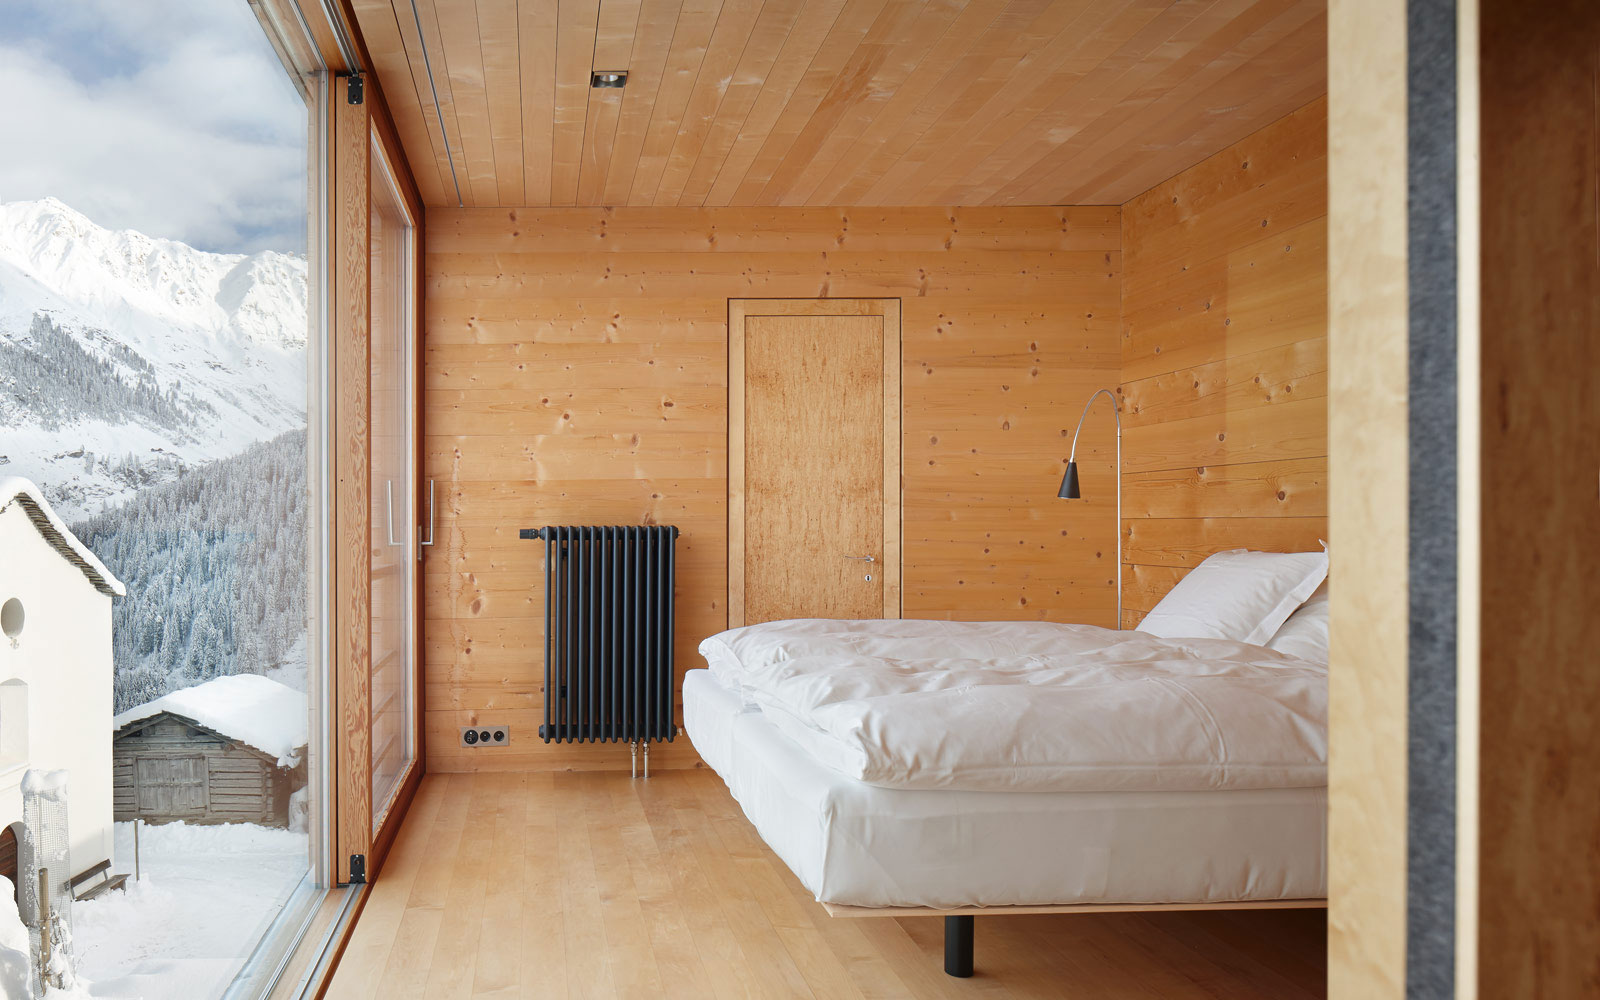 Bedroom Design Vacation Wondrous Bedroom Design Of Zumthor Vacation Homes With White Bed Linen White Pillows And White Colored Blanket  Simple Wooden Interior From Zumthor Vacation Home 